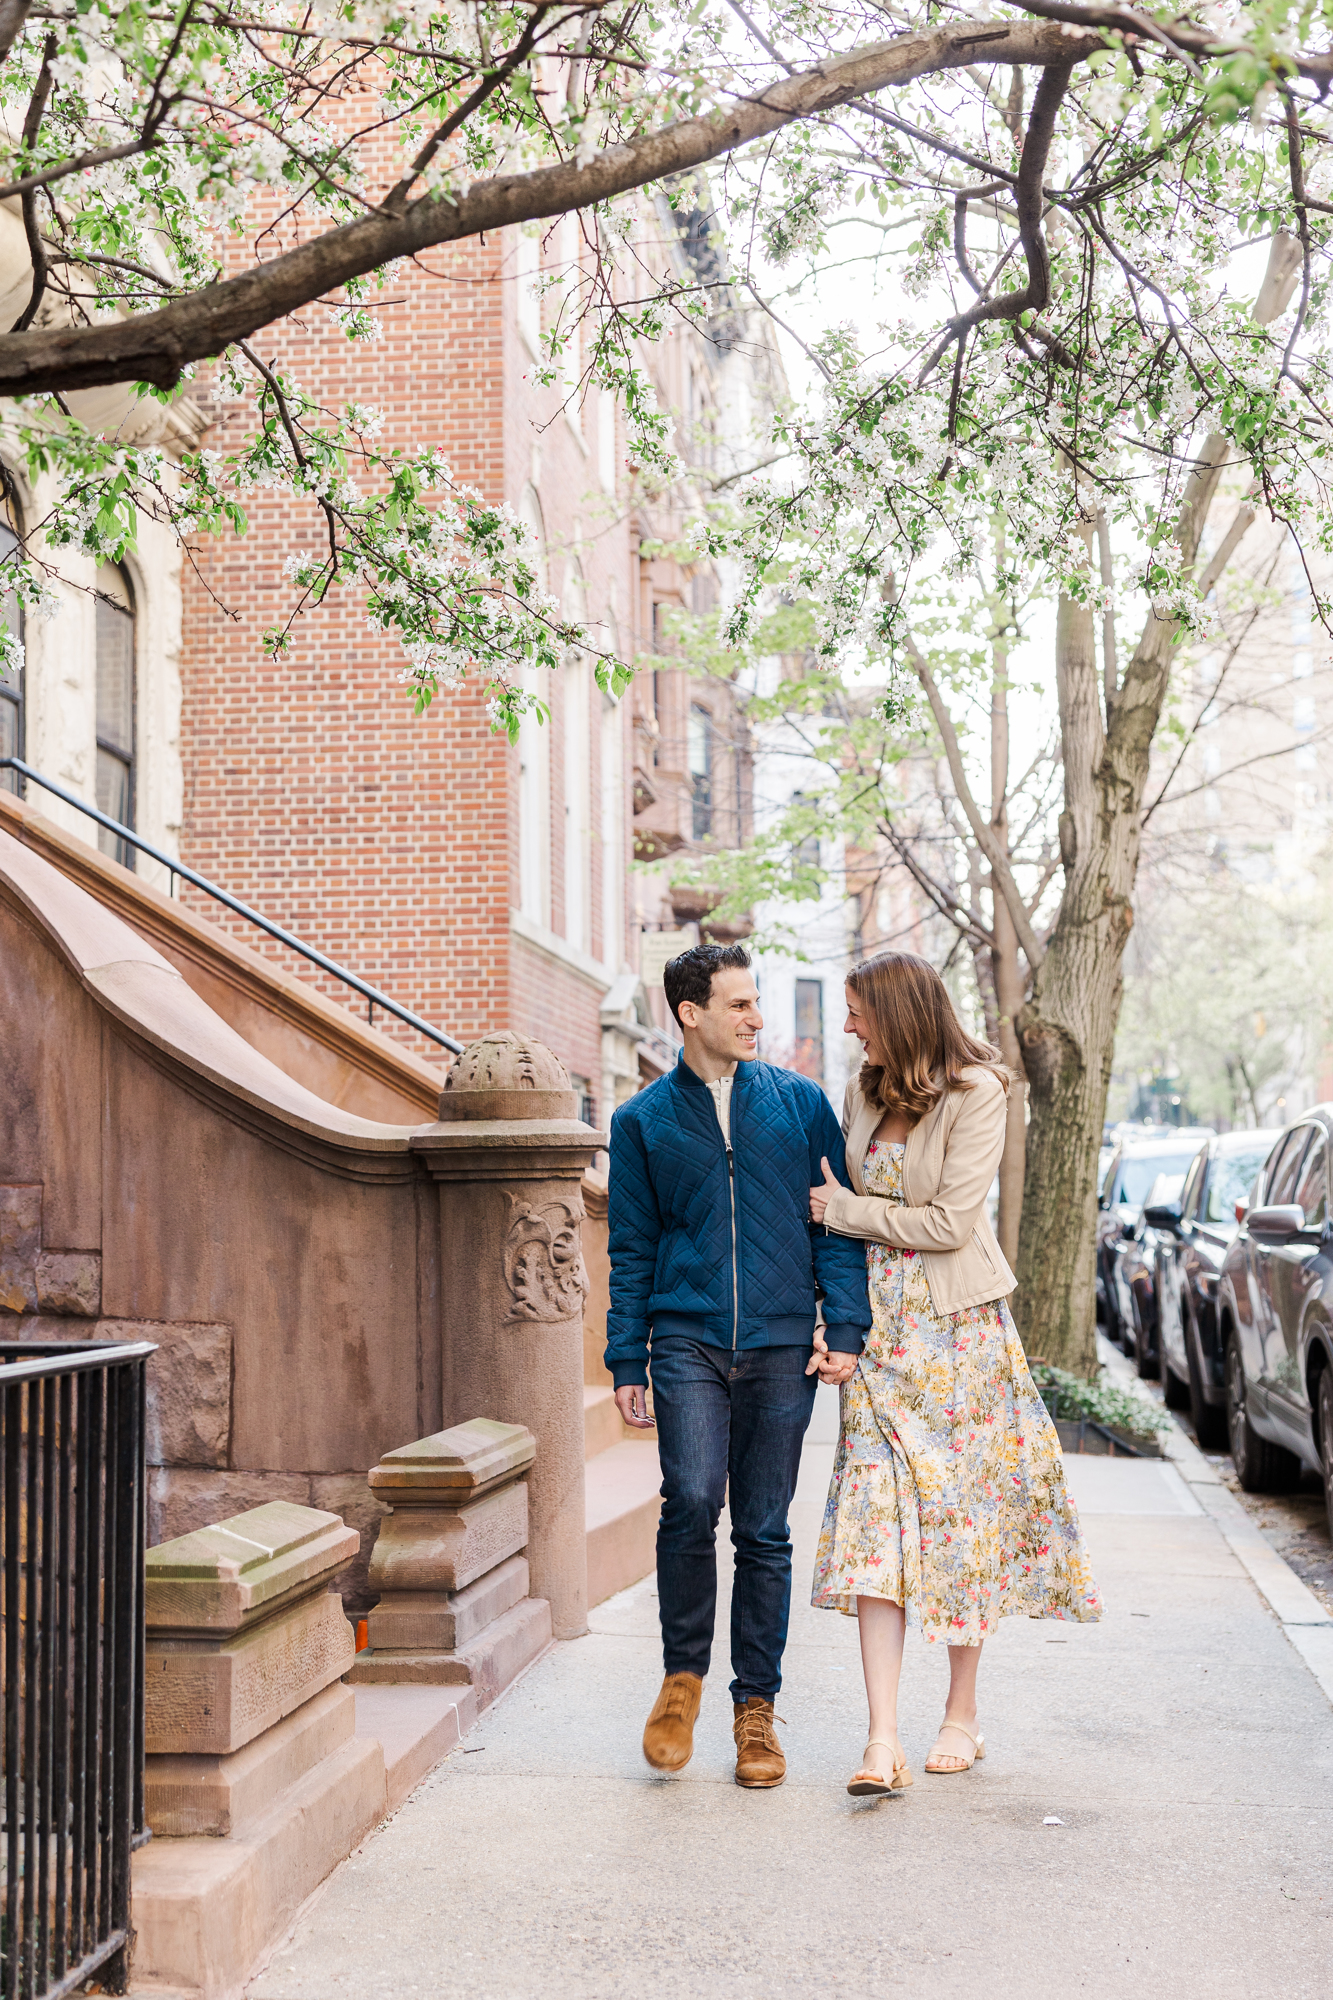 Intimate Upper East Side Engagement Photo Shoot in Spring